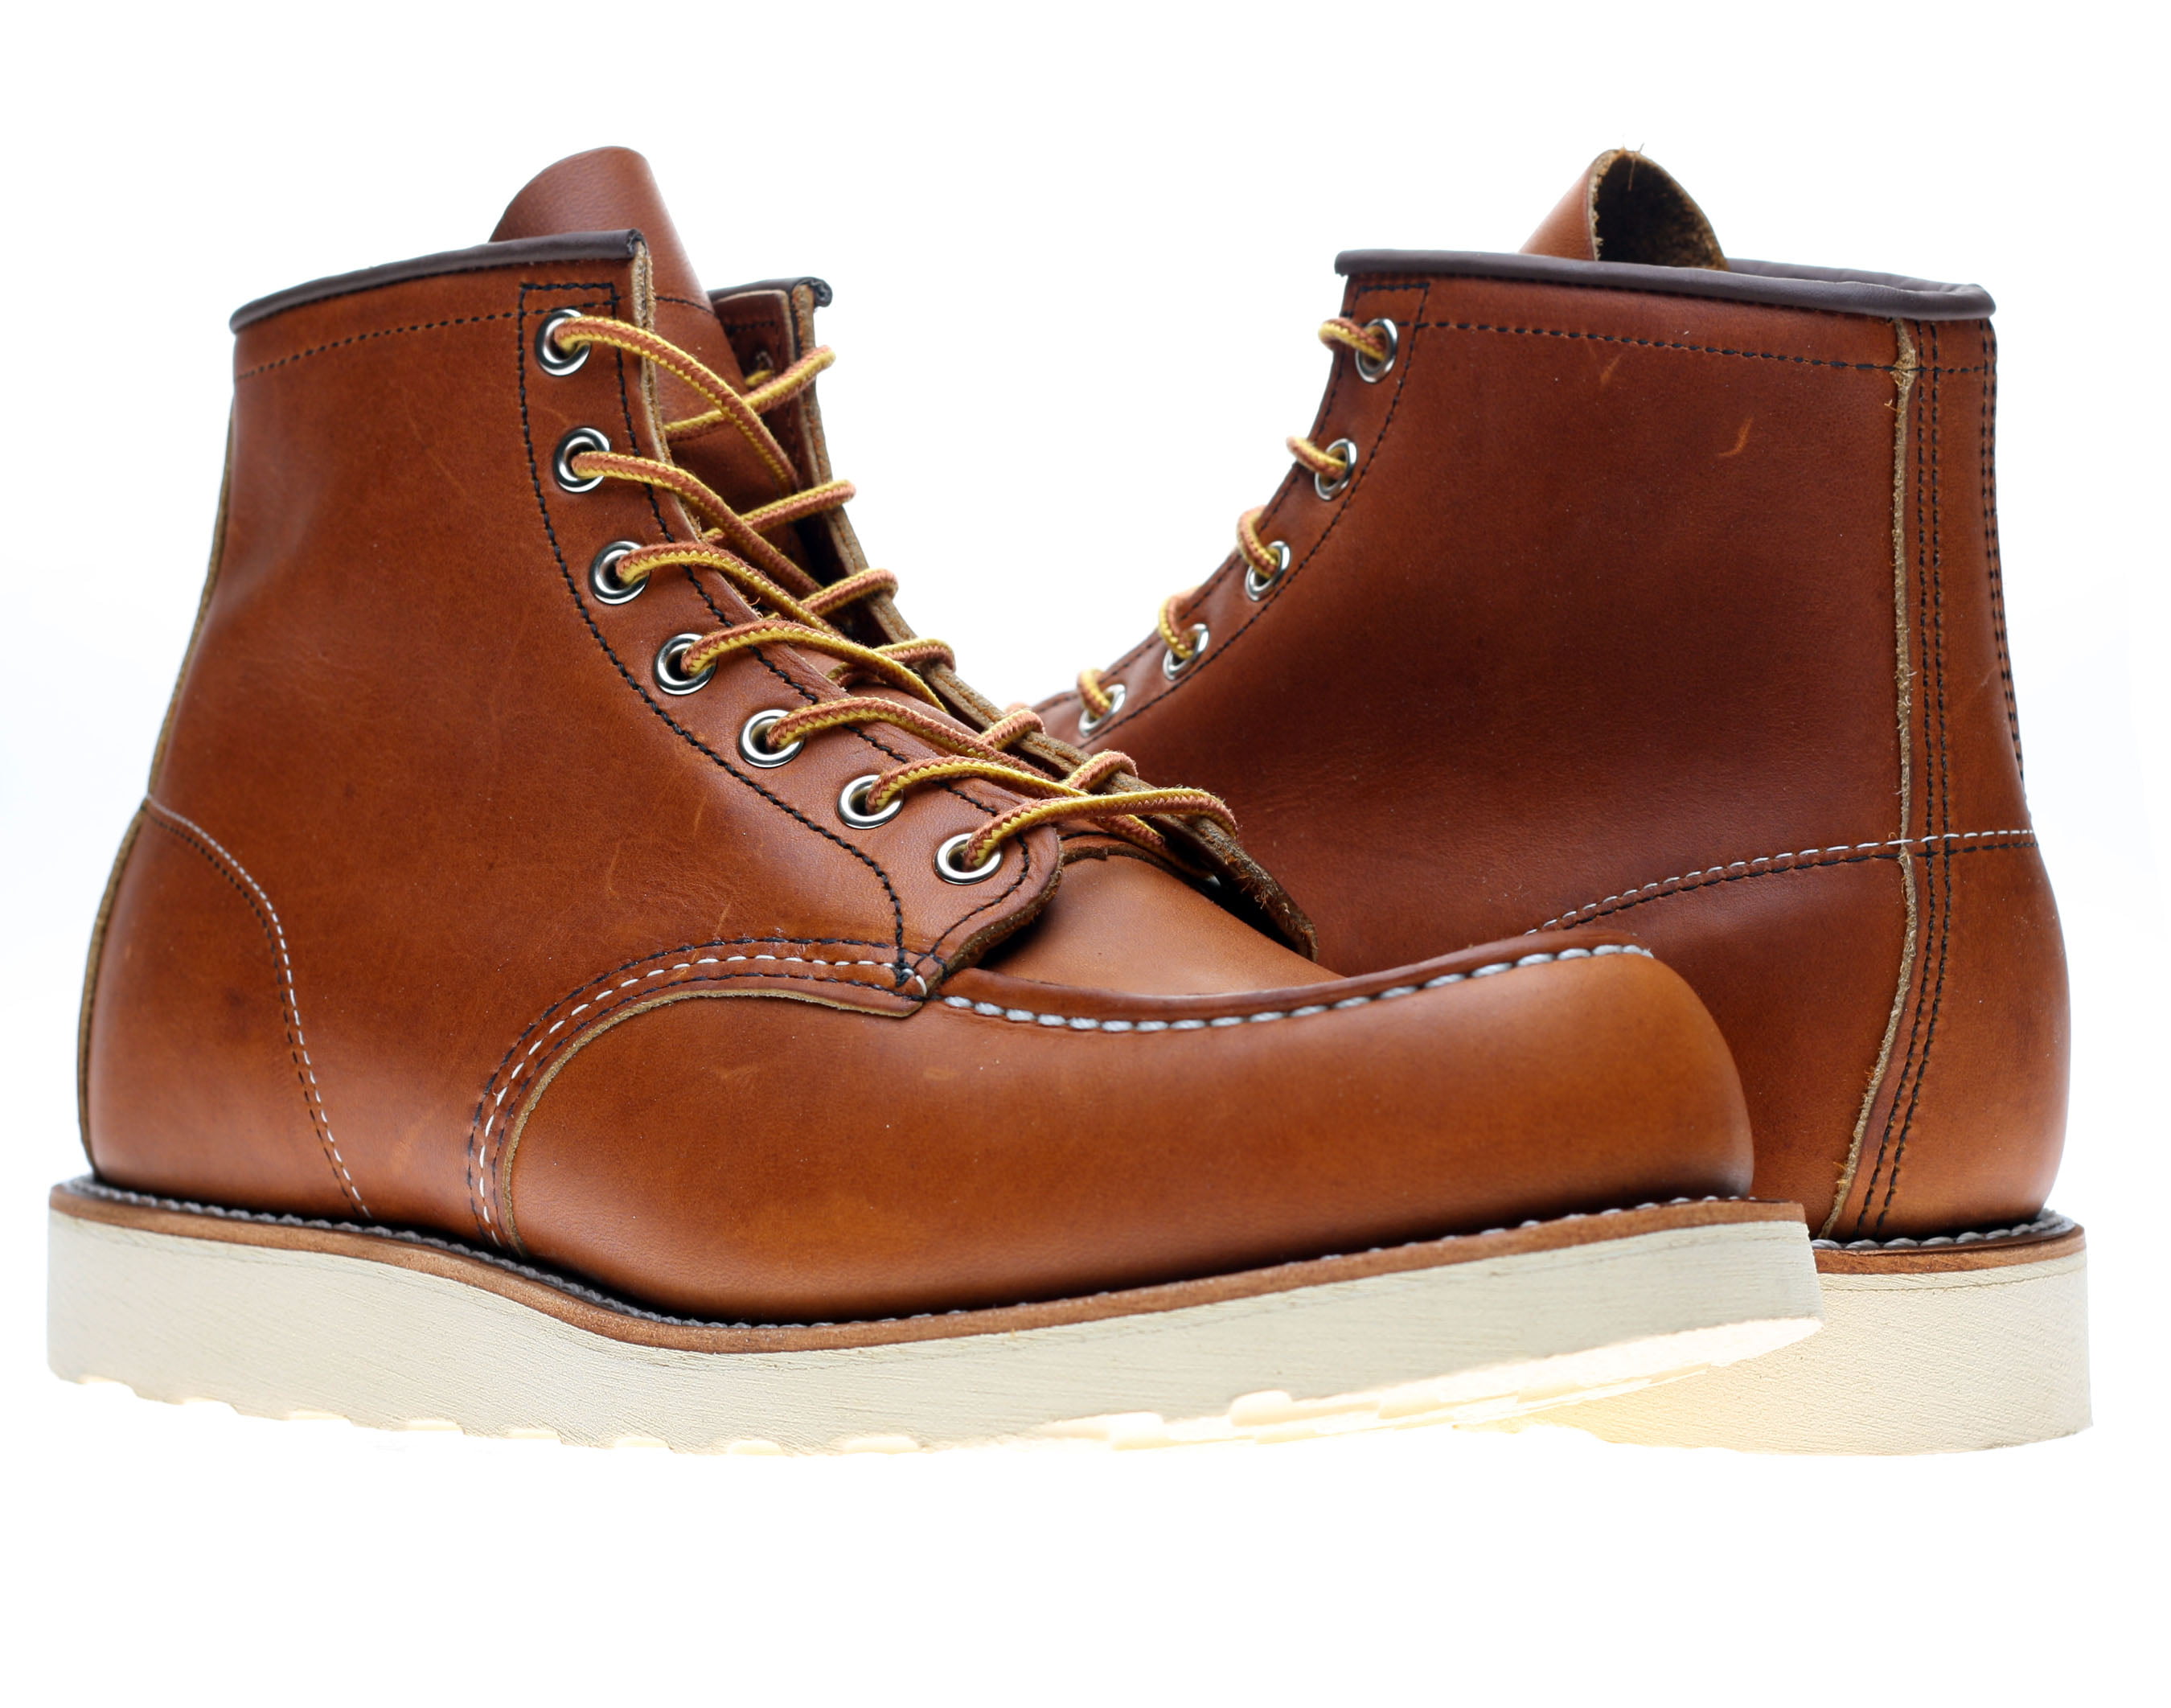 Red Wing - Red Wing Heritage Men's 875 6" Classic Moc Toe Boots